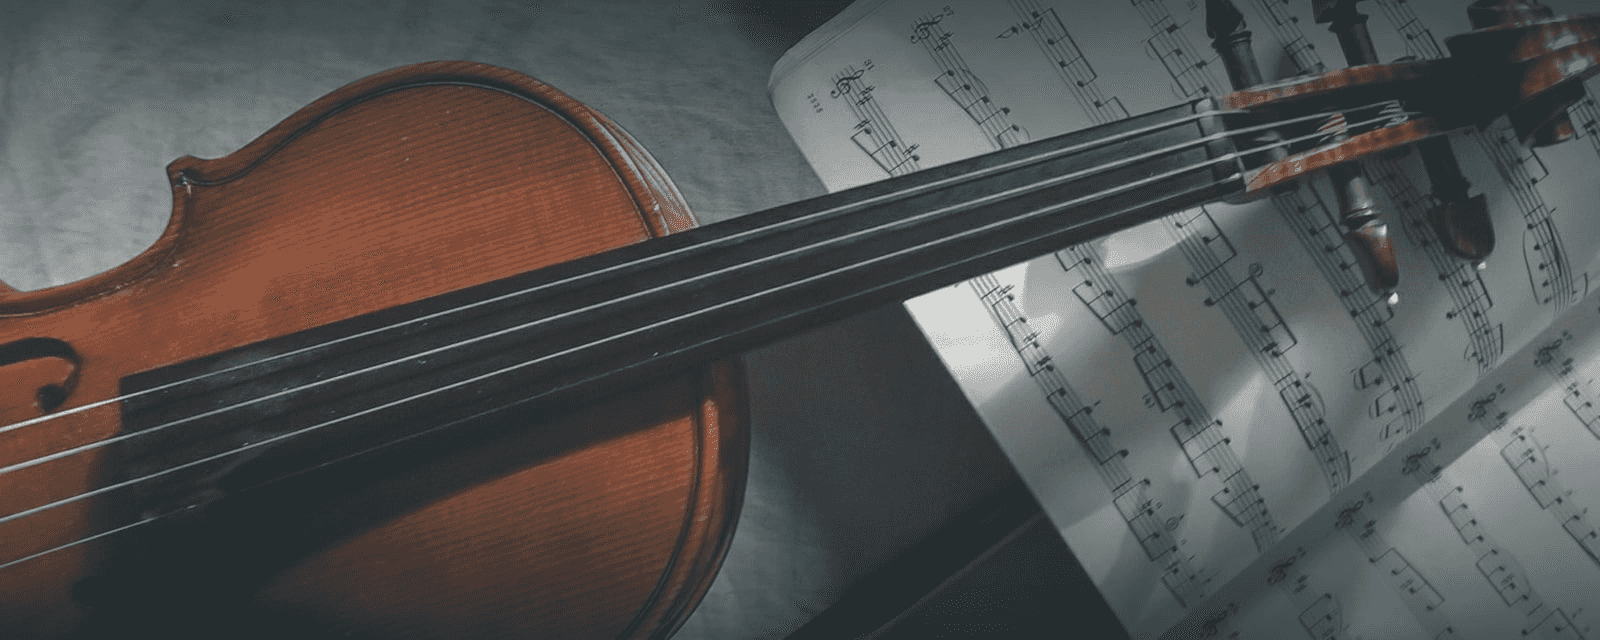 Violin lessons in Basel for beginner, intermediate and advanced students